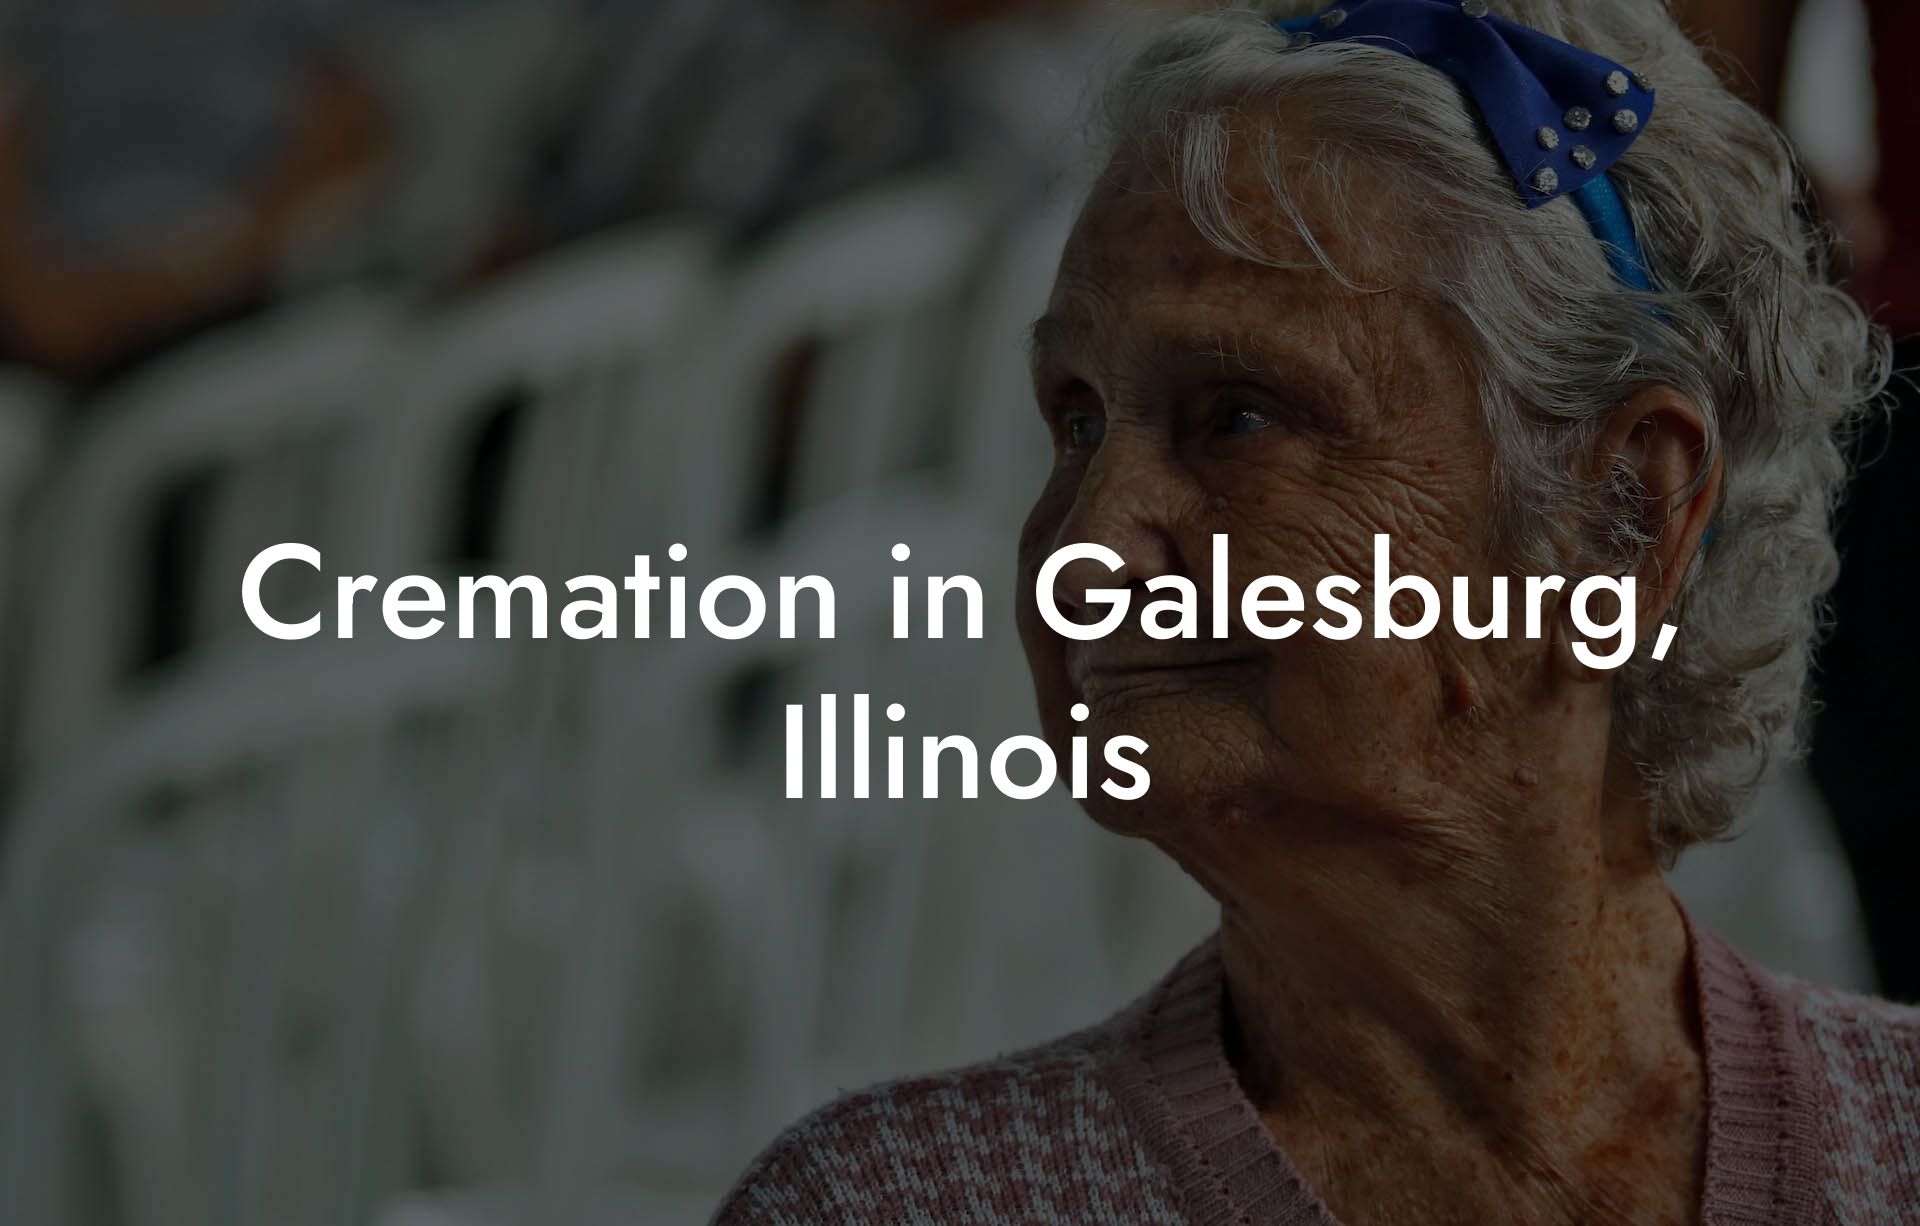 Cremation in Galesburg, Illinois